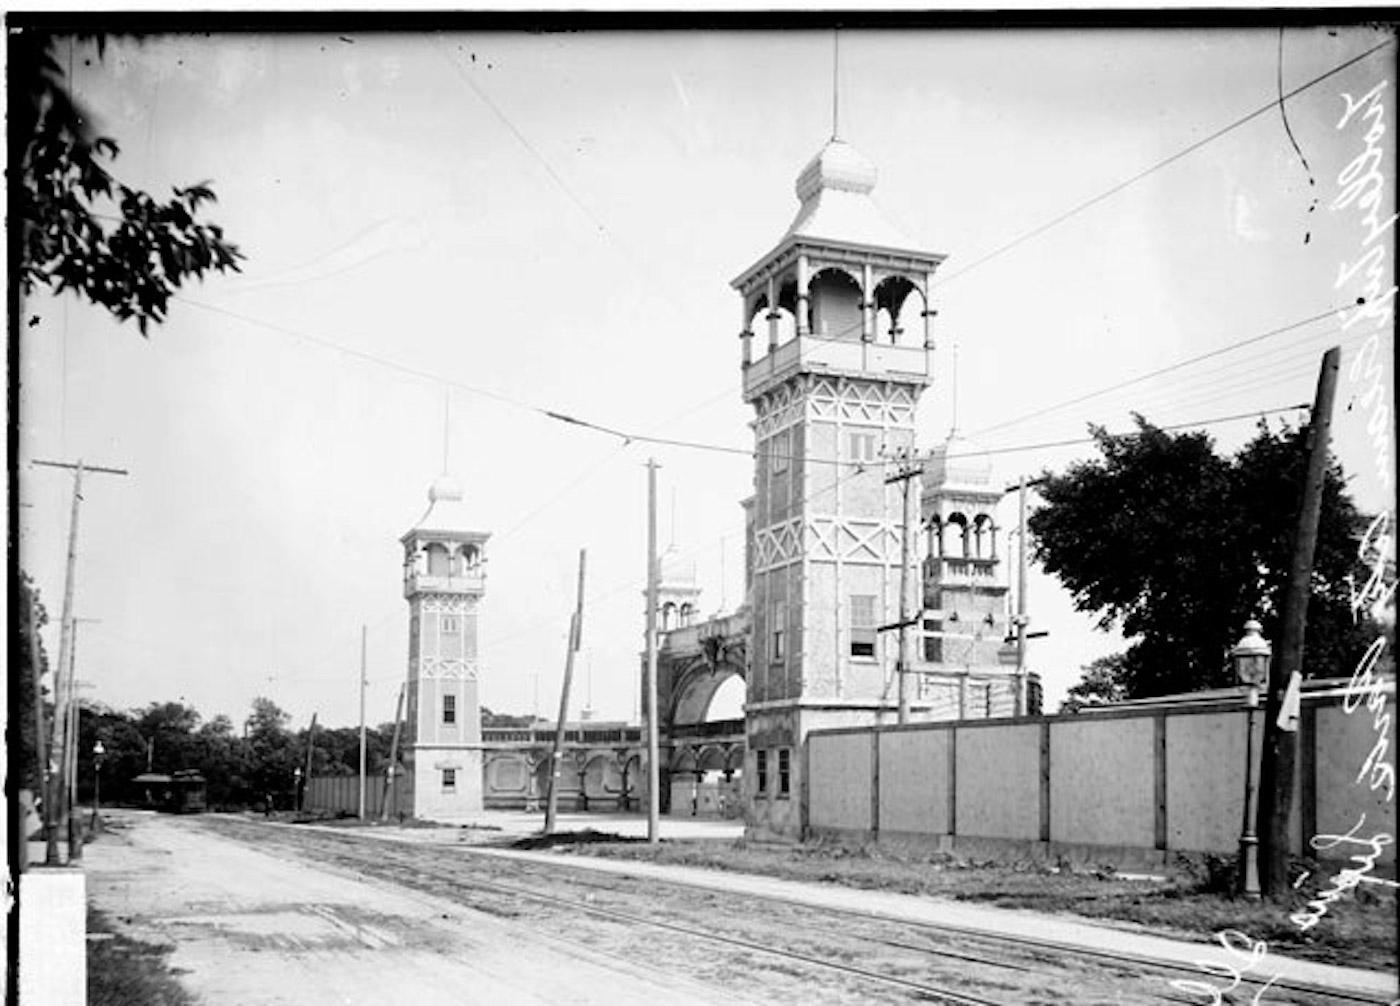 The gates of Cream City in Lyons. Photo: DN-0006805, Chicago Daily News collection, Chicago History Museum